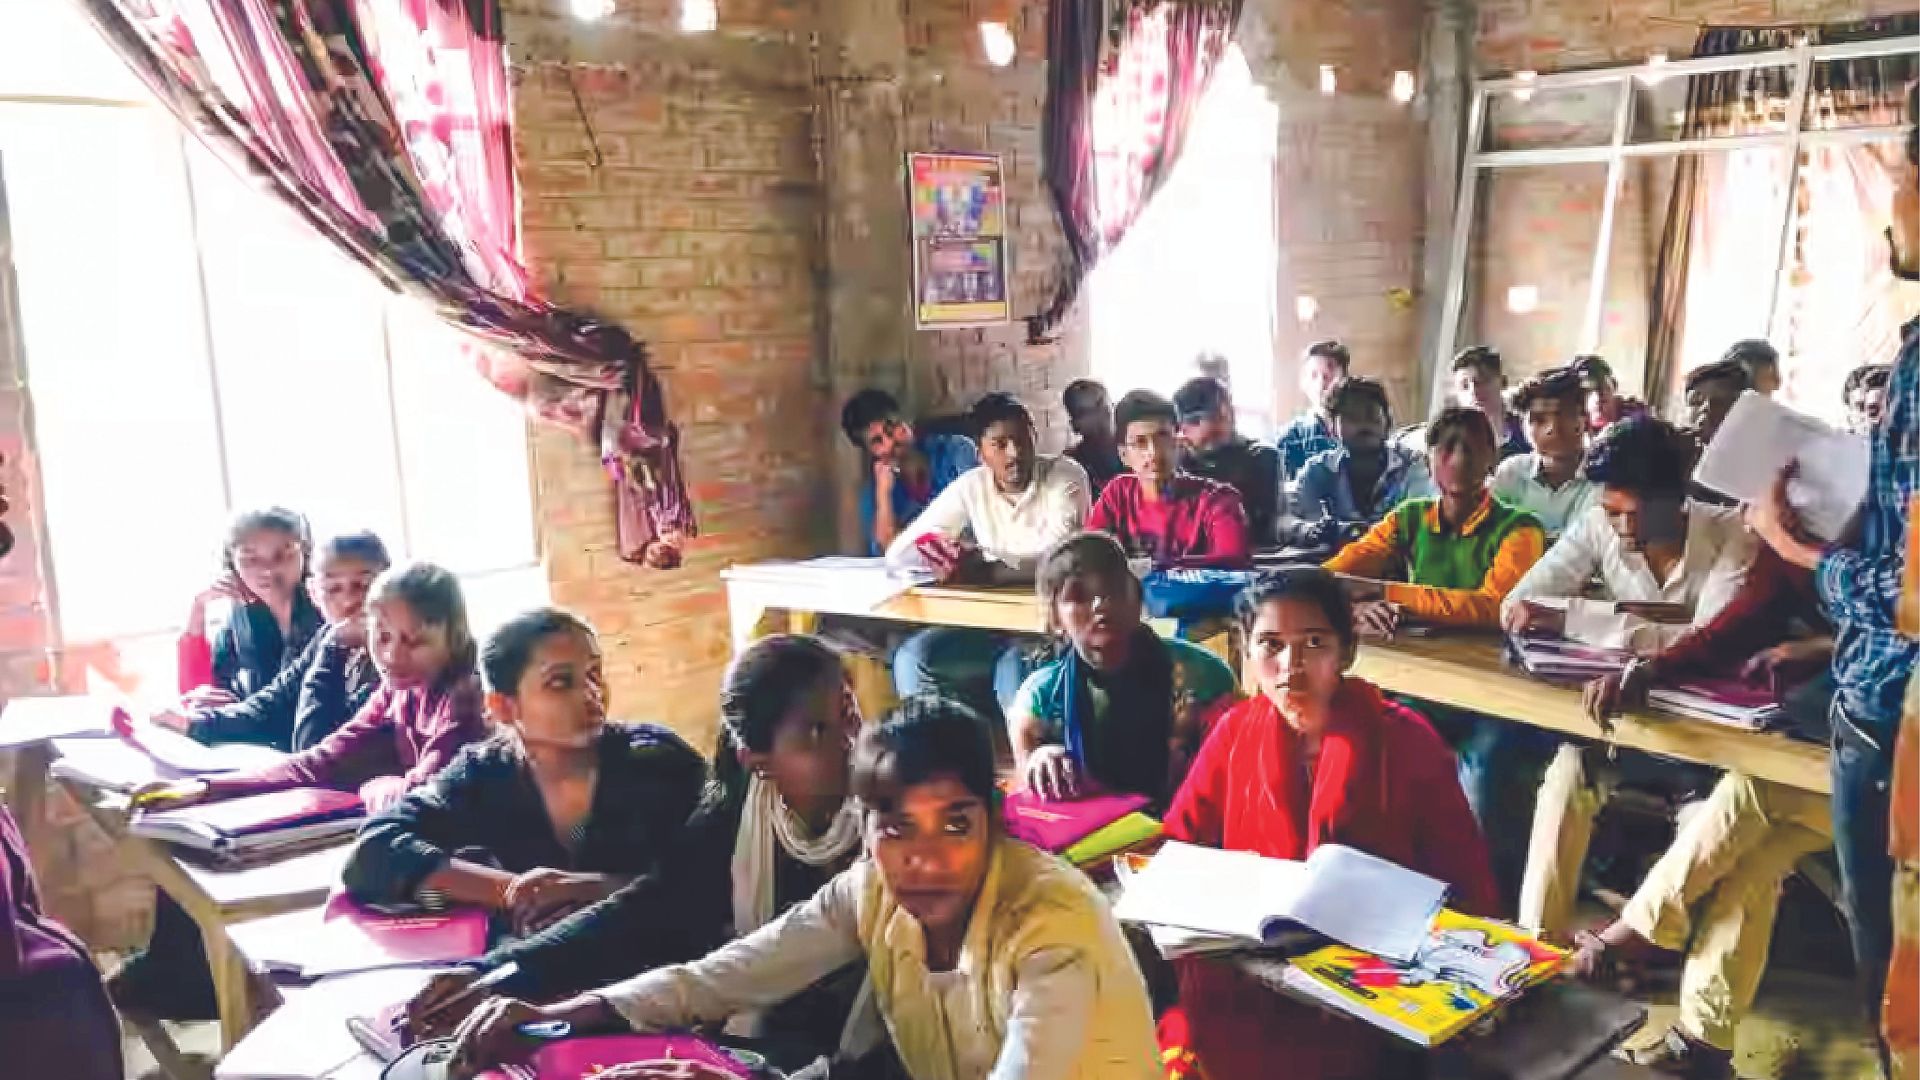 Motivation is huge when it comes to doing well in school, especially for kids in remote areas who might not have the same opportunities as others. Career counselling sessions can be a real game-changer for these students, helping them figure out what they want to do with their lives and giving them a sense of direction.